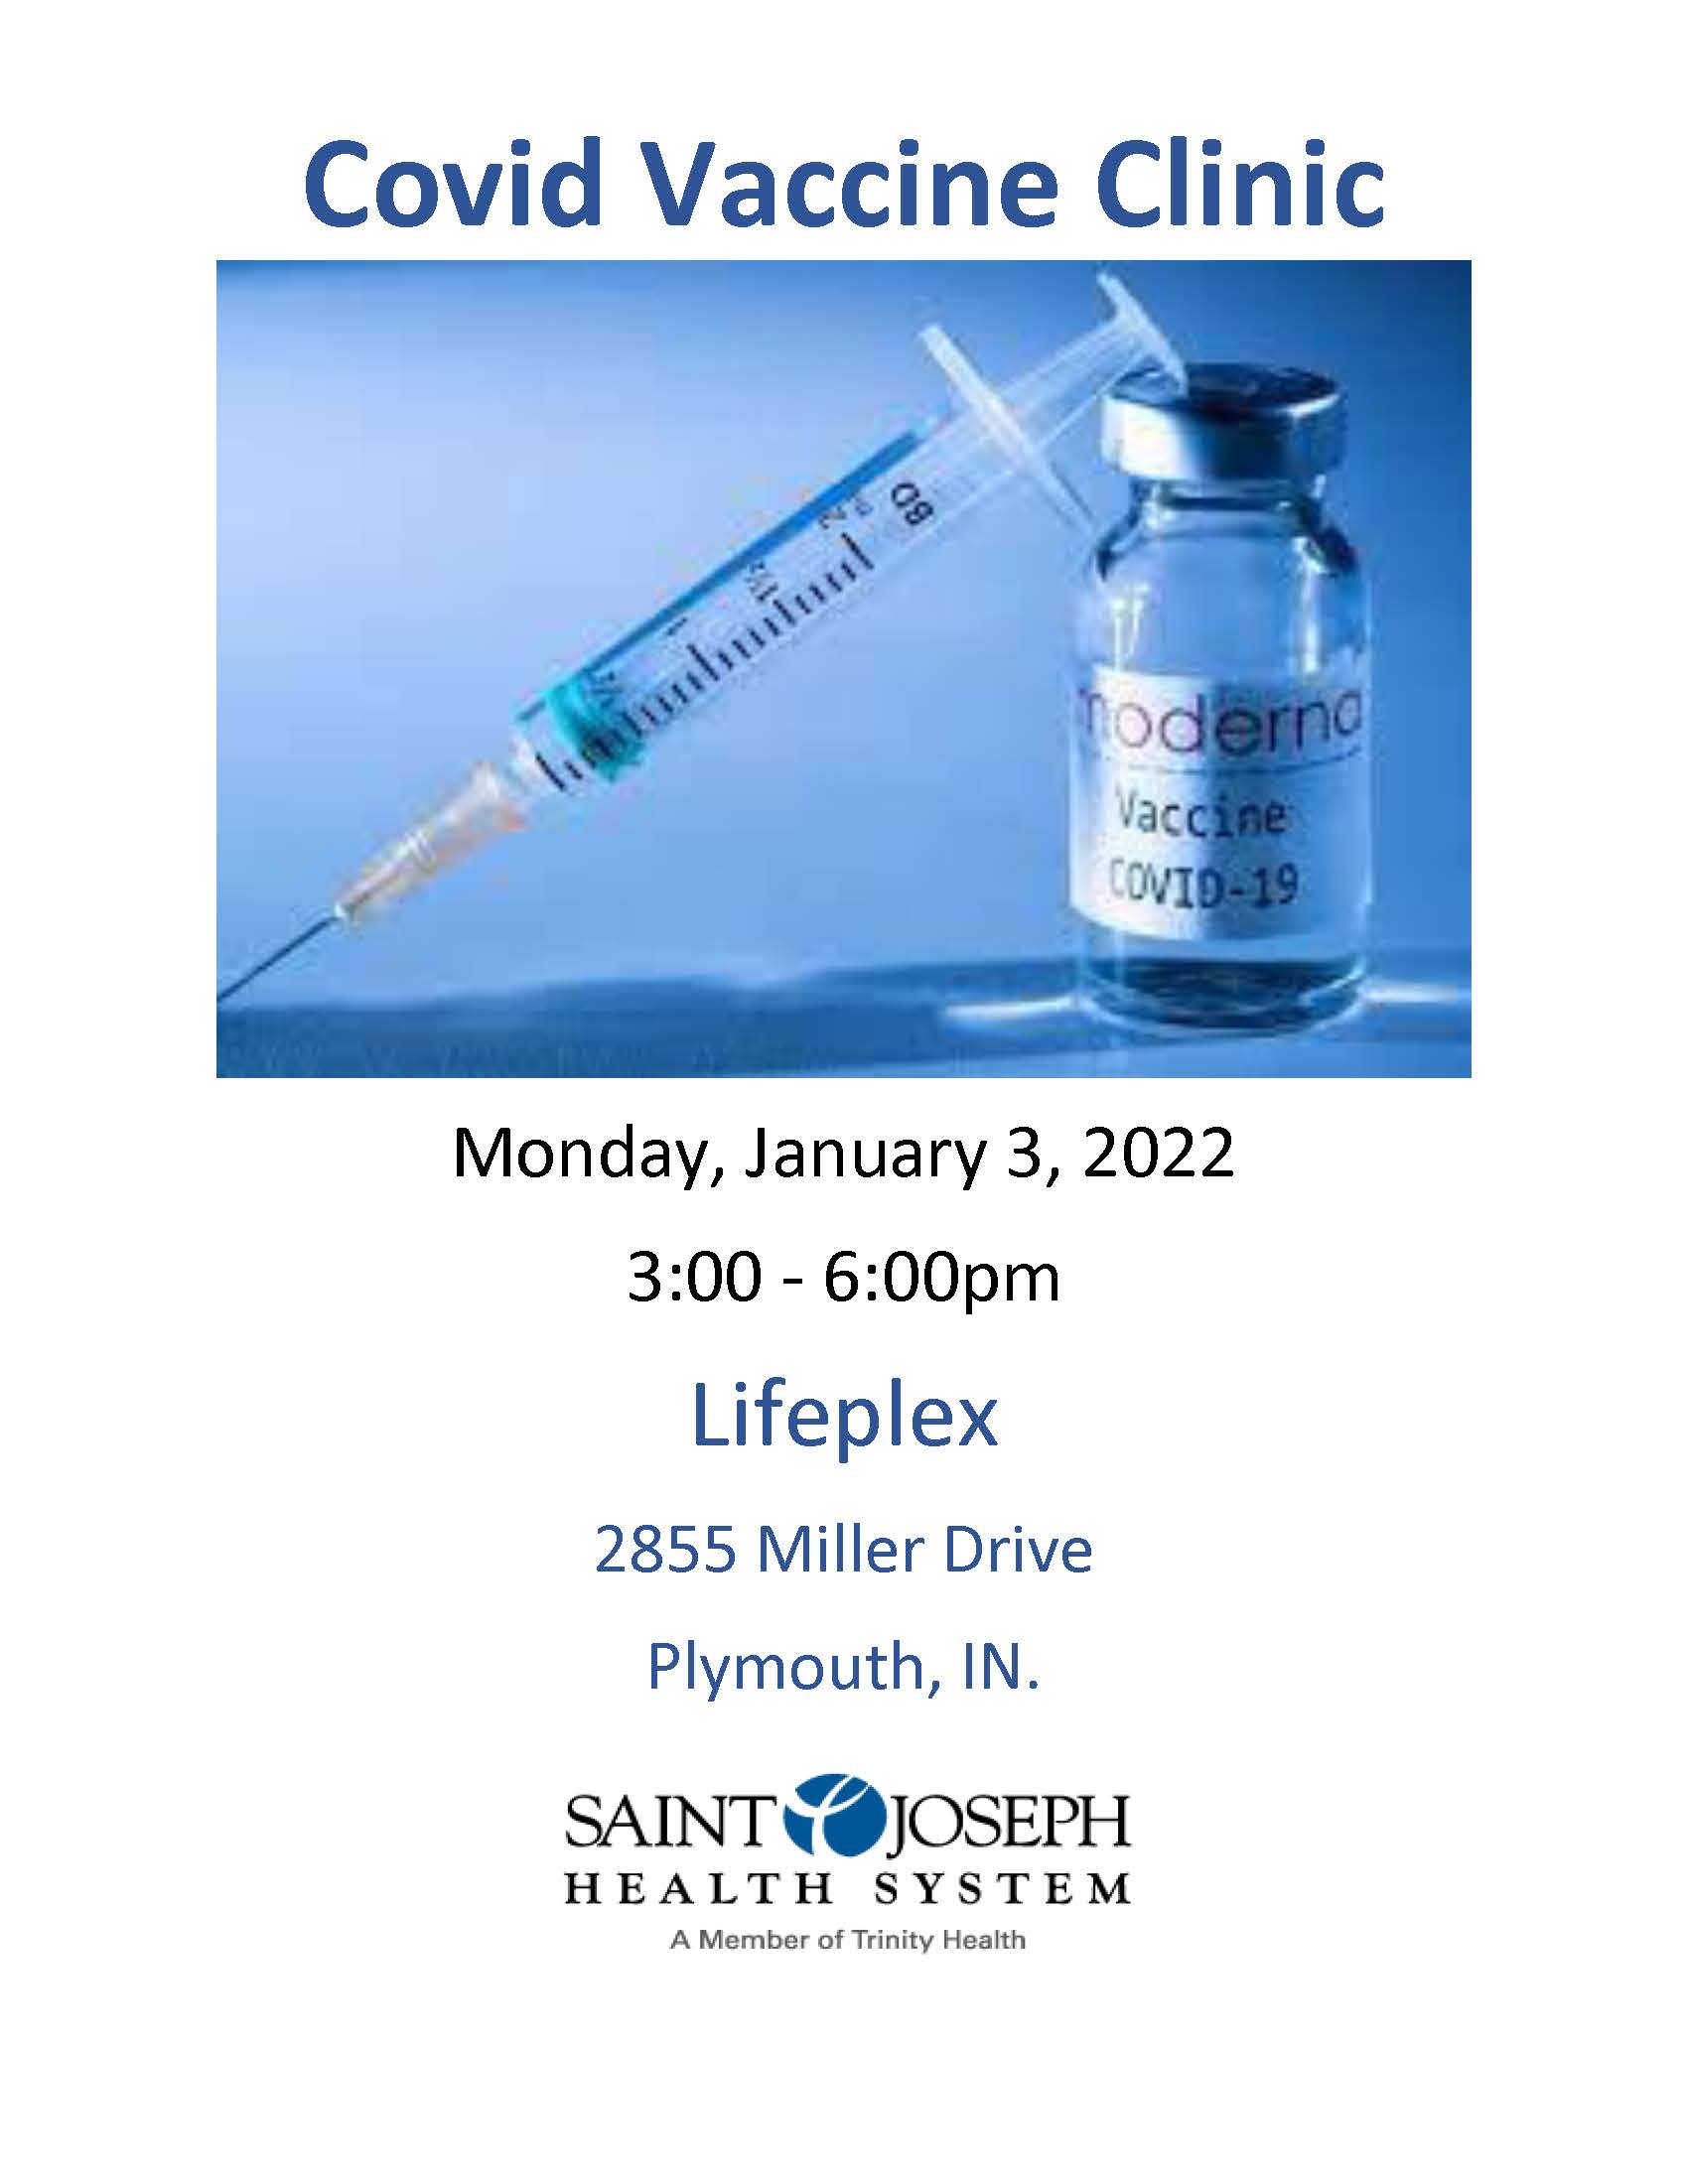 COVID-19 Vaccine Clinic from 3-6 PM at the Lifeplex at 2855 Miller Drive